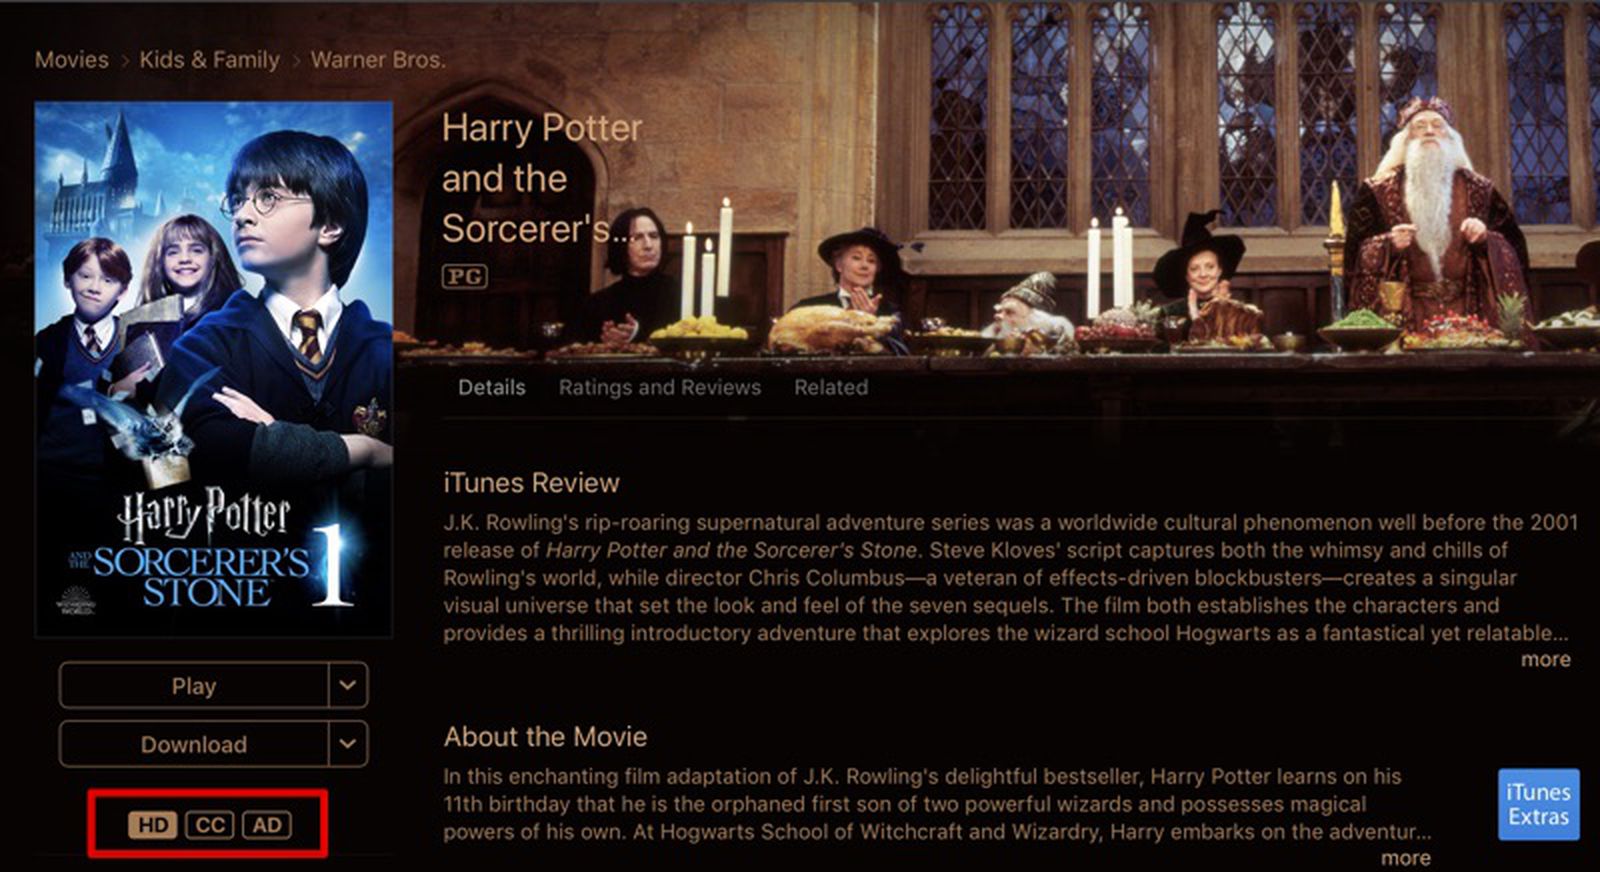 Are the Harry Potter movies available on iTunes?